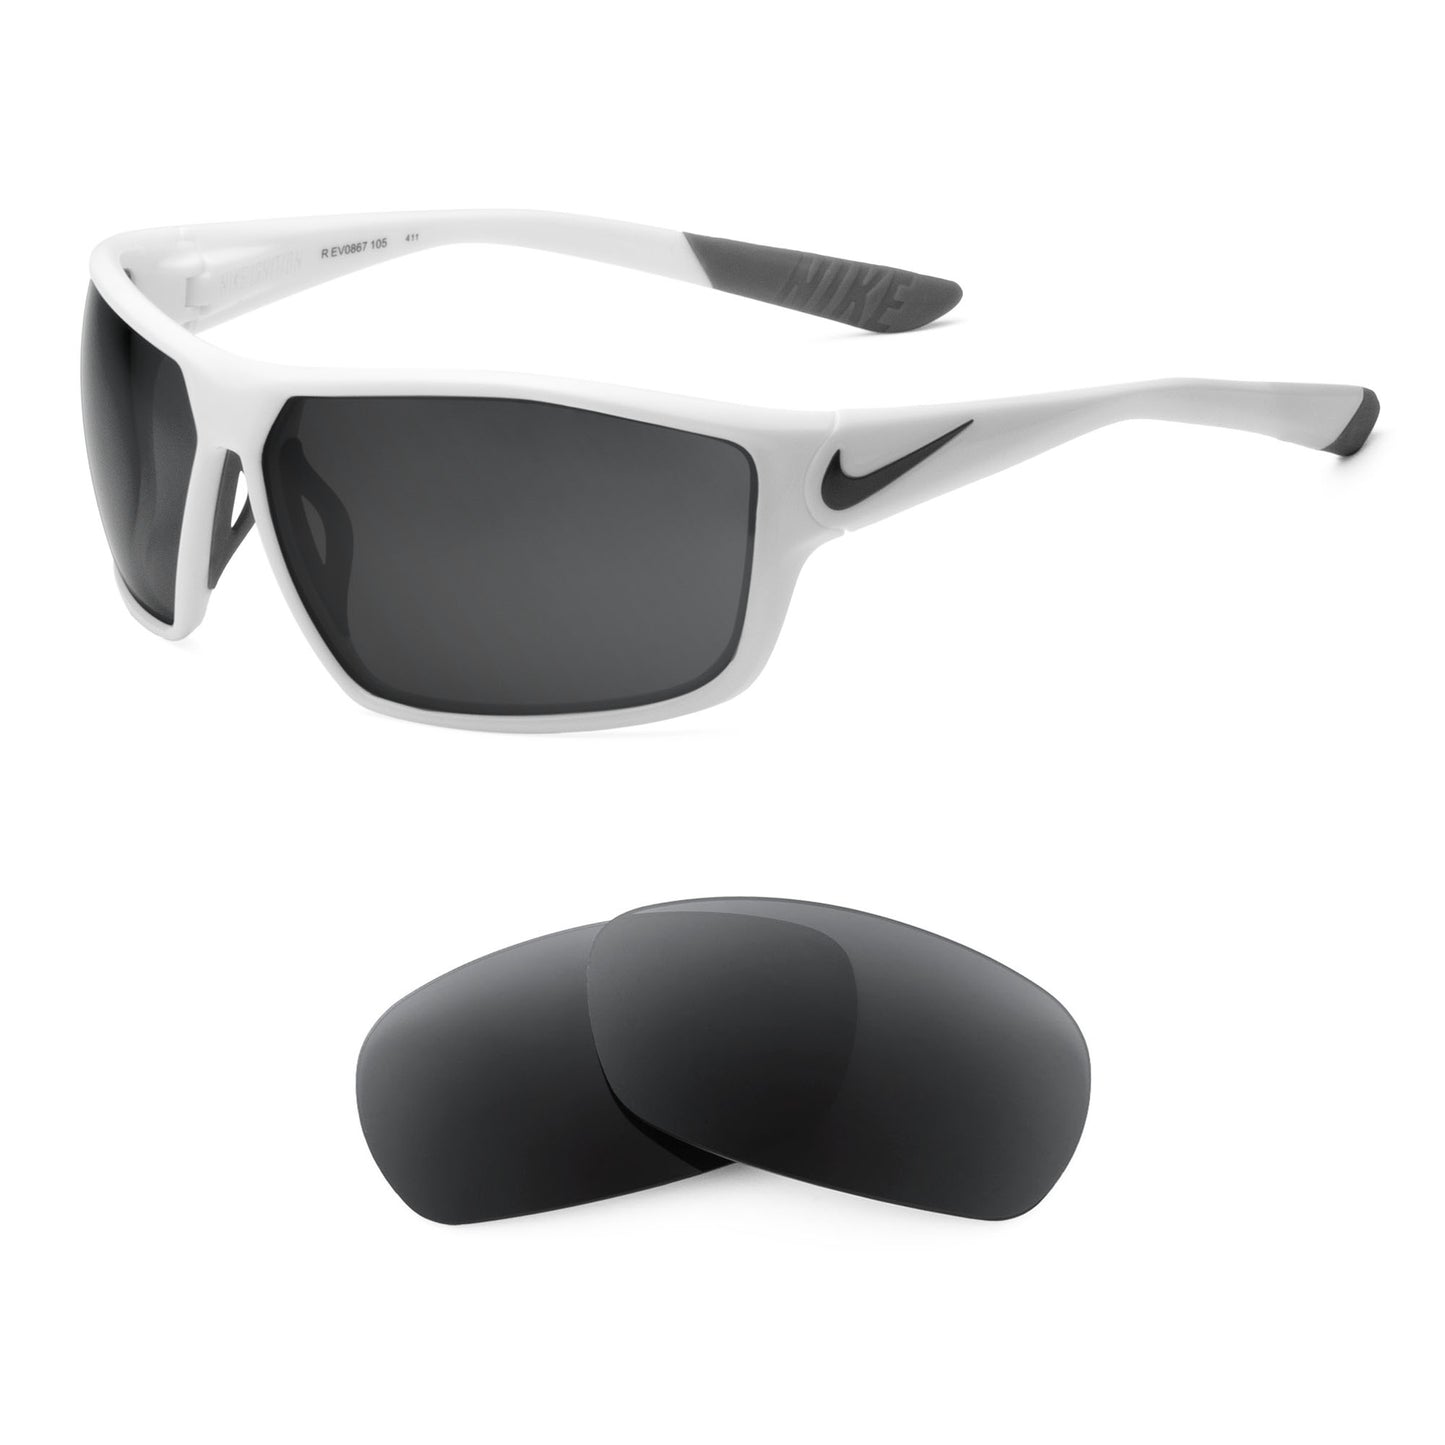 Nike Ignition sunglasses with replacement lenses